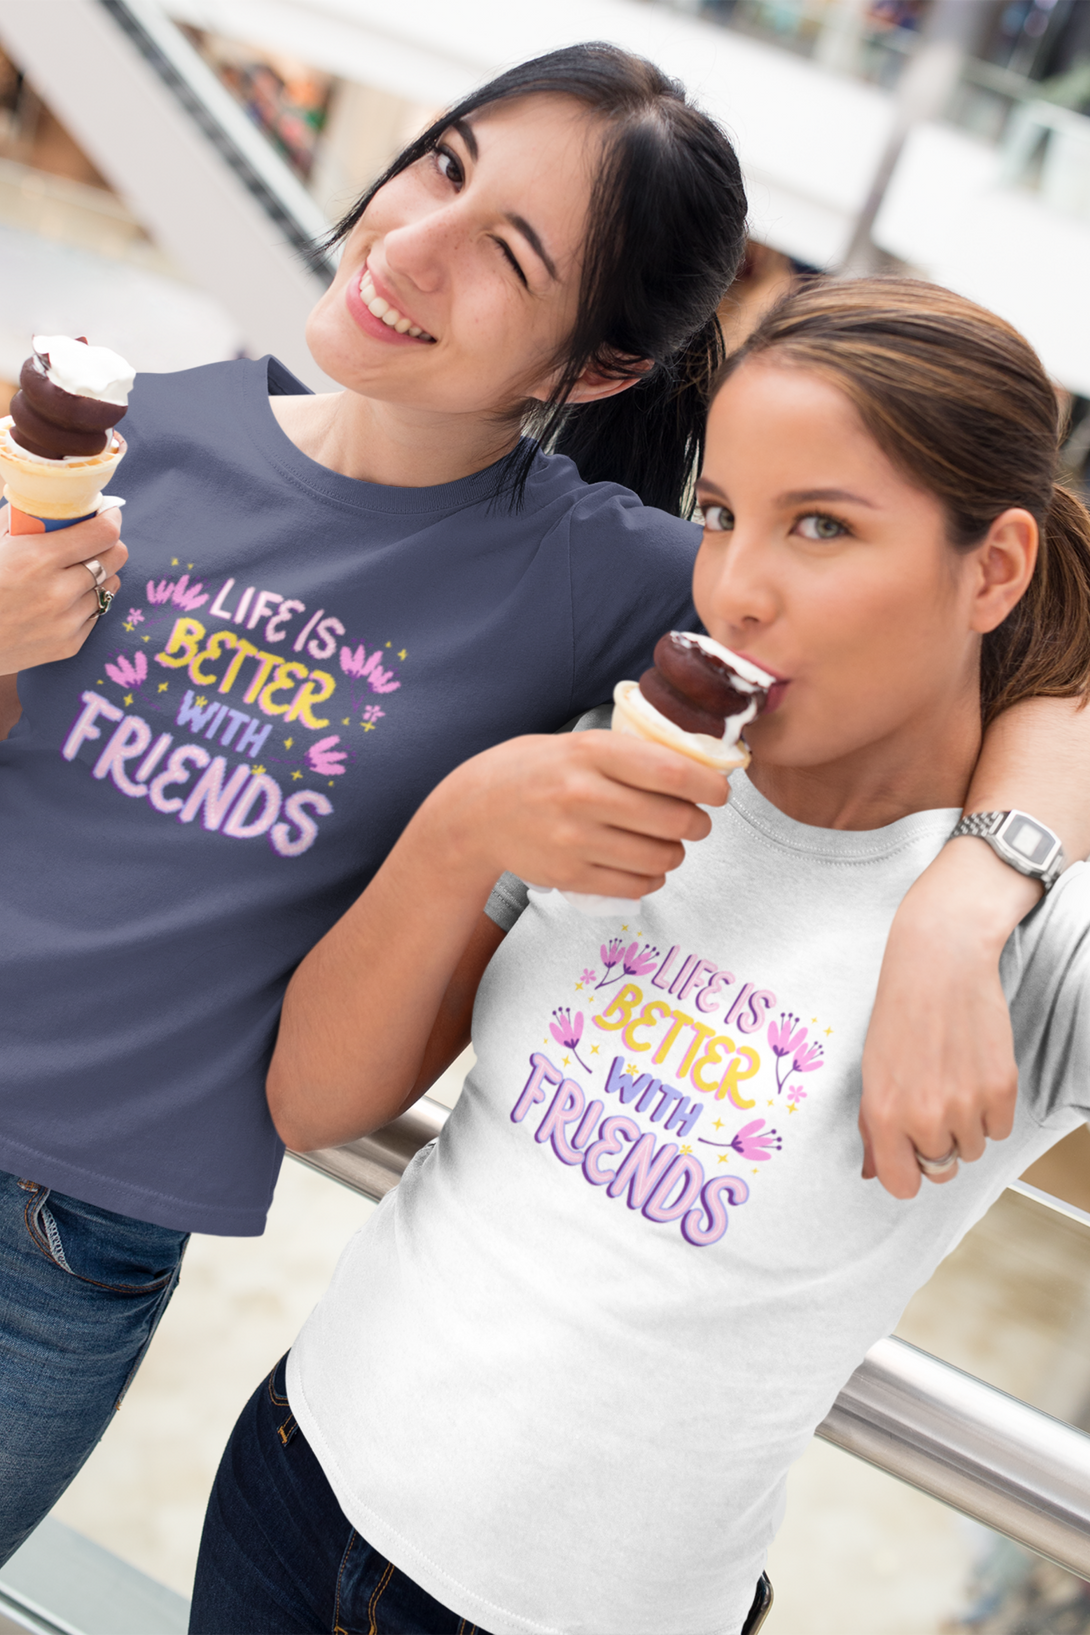 Life Is Better With Friends Printed T-Shirt For Women - WowWaves - 2